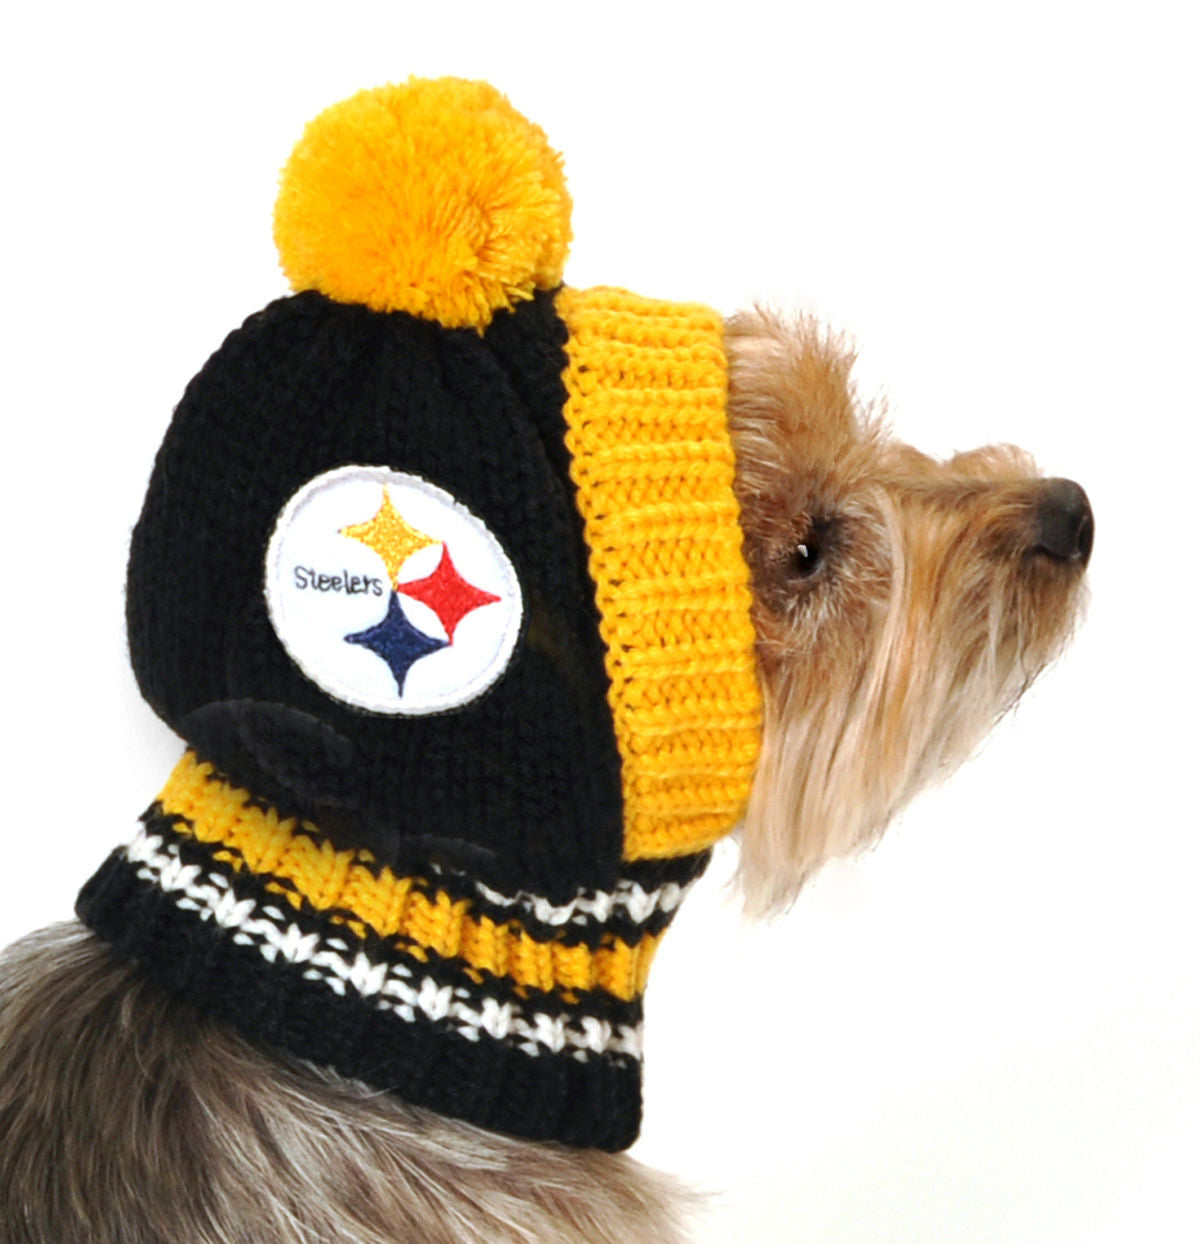 Little Earth 3C20125-STLR-SM Small NFL Steelers Knit Hat